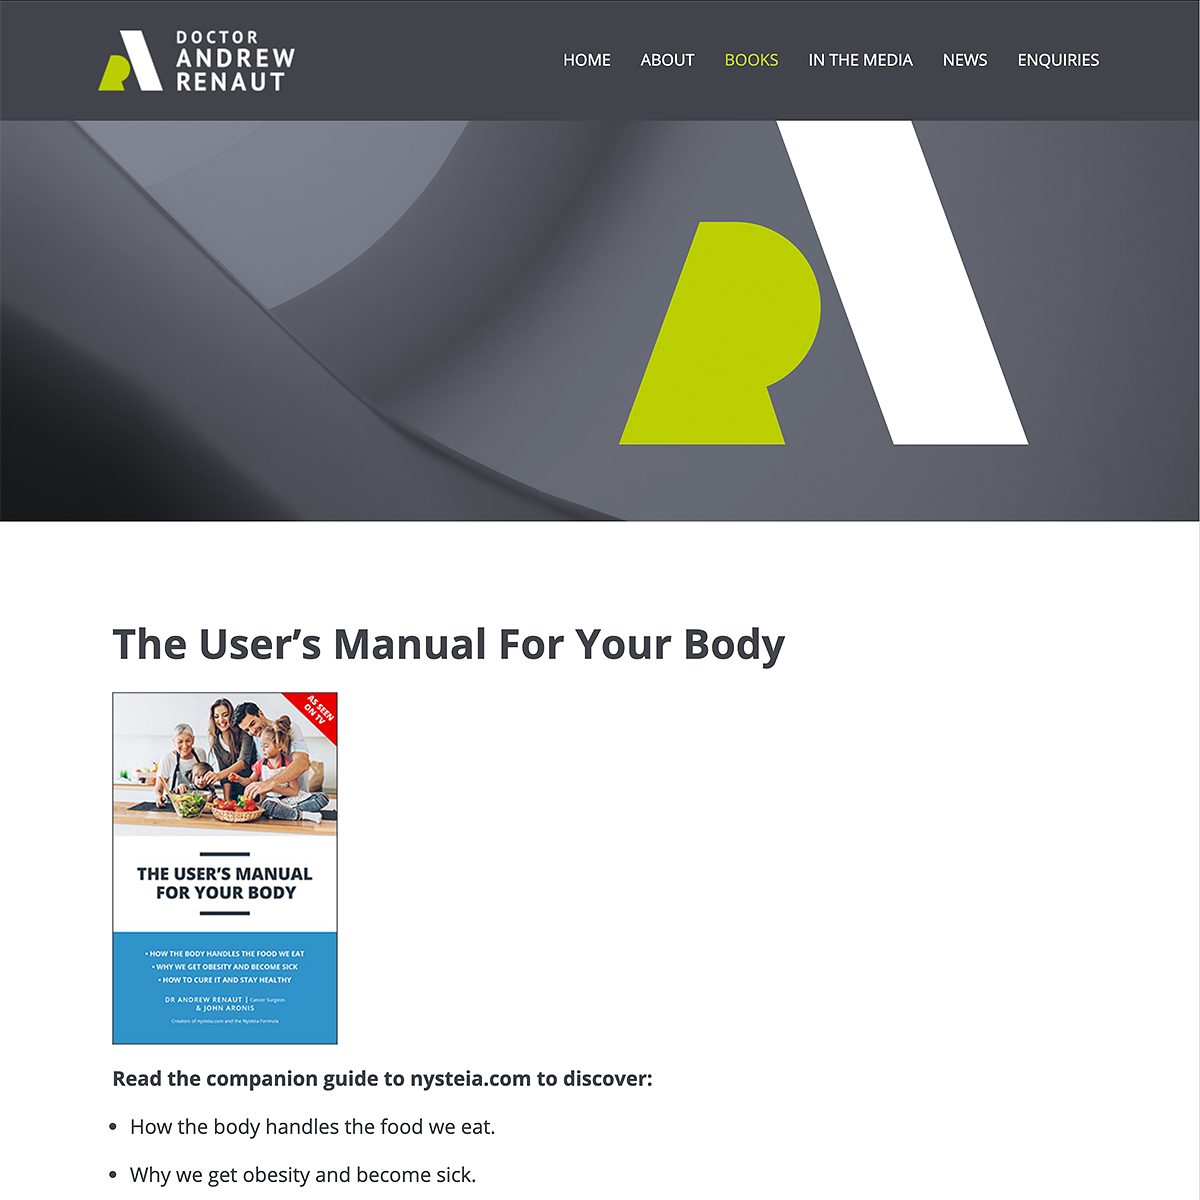 Dr Andrew Renaut - The User's Manual For Your Body